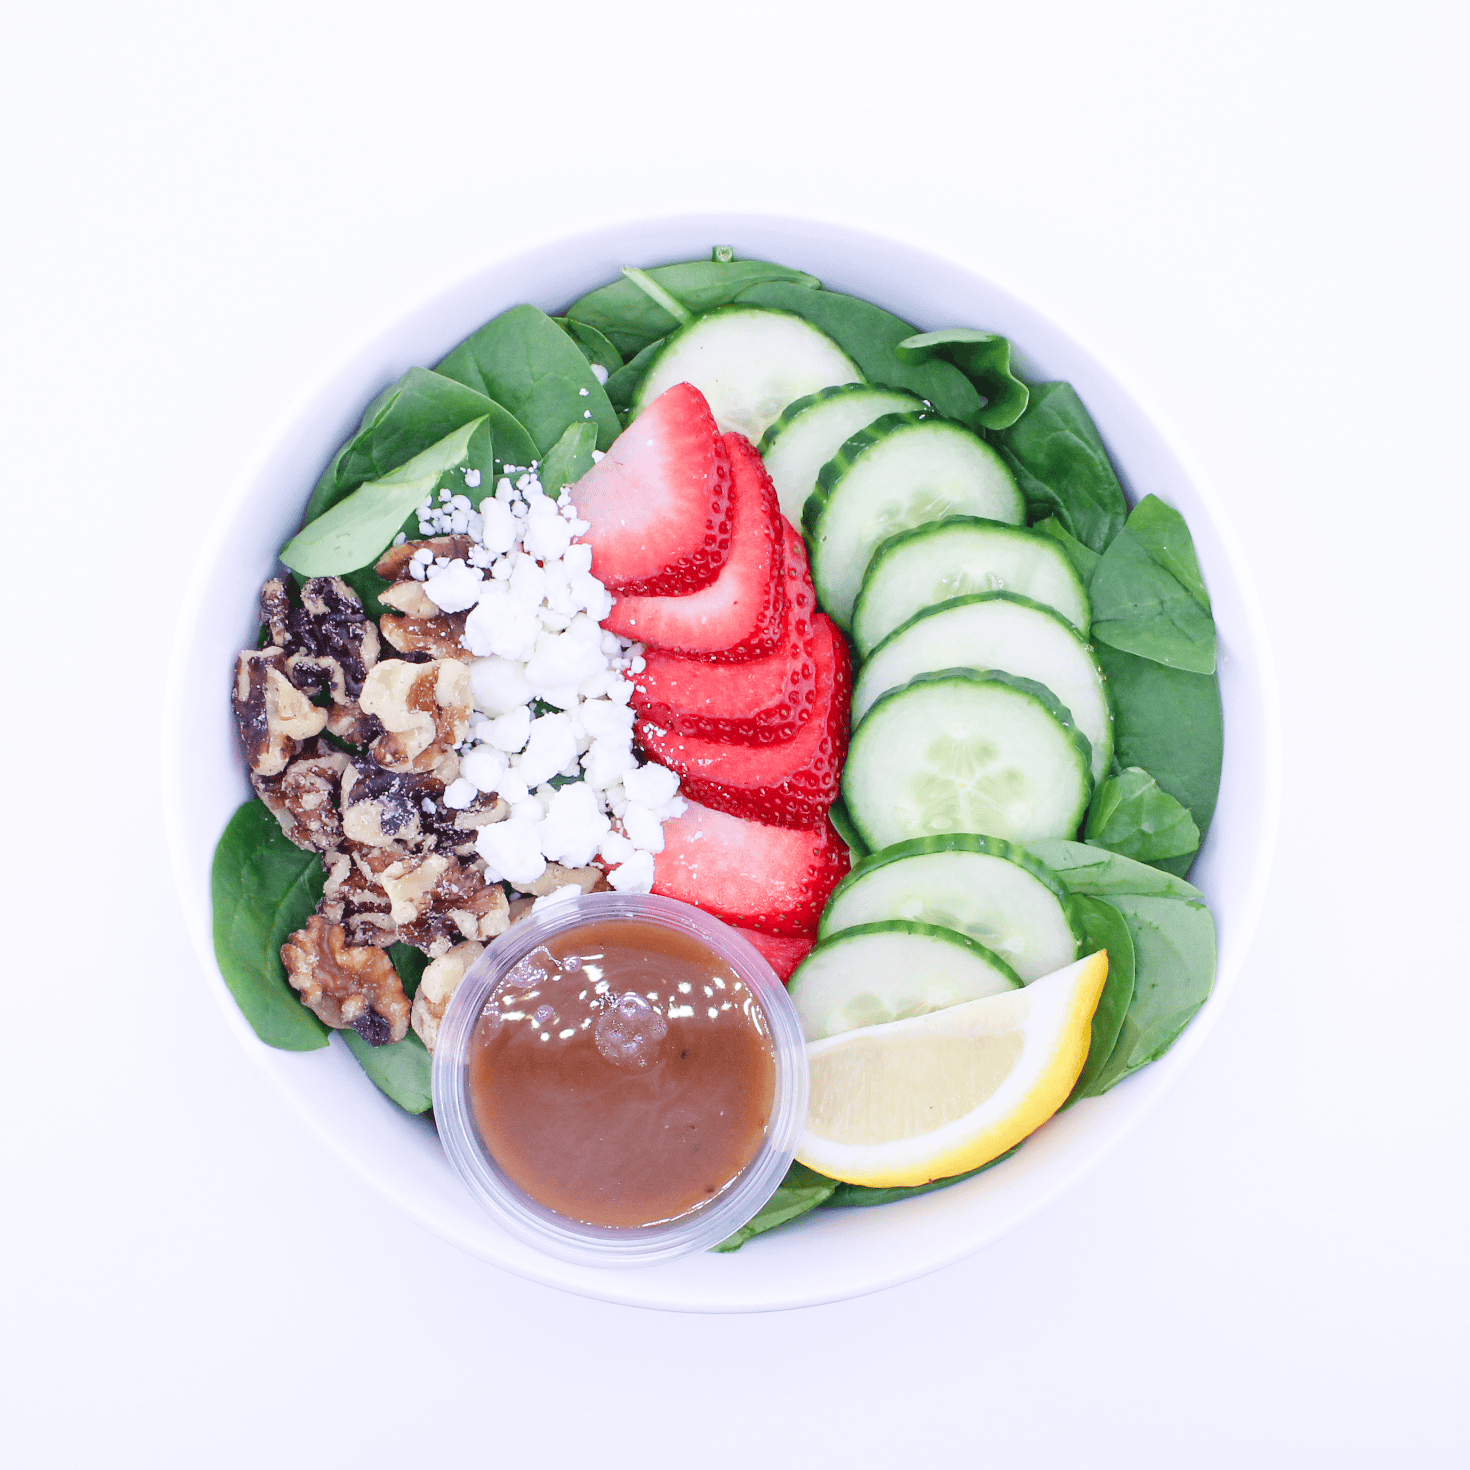 Strawberry slices, cucumbers, goat cheese, candied walnuts, spinach, balsamic vinaigrette